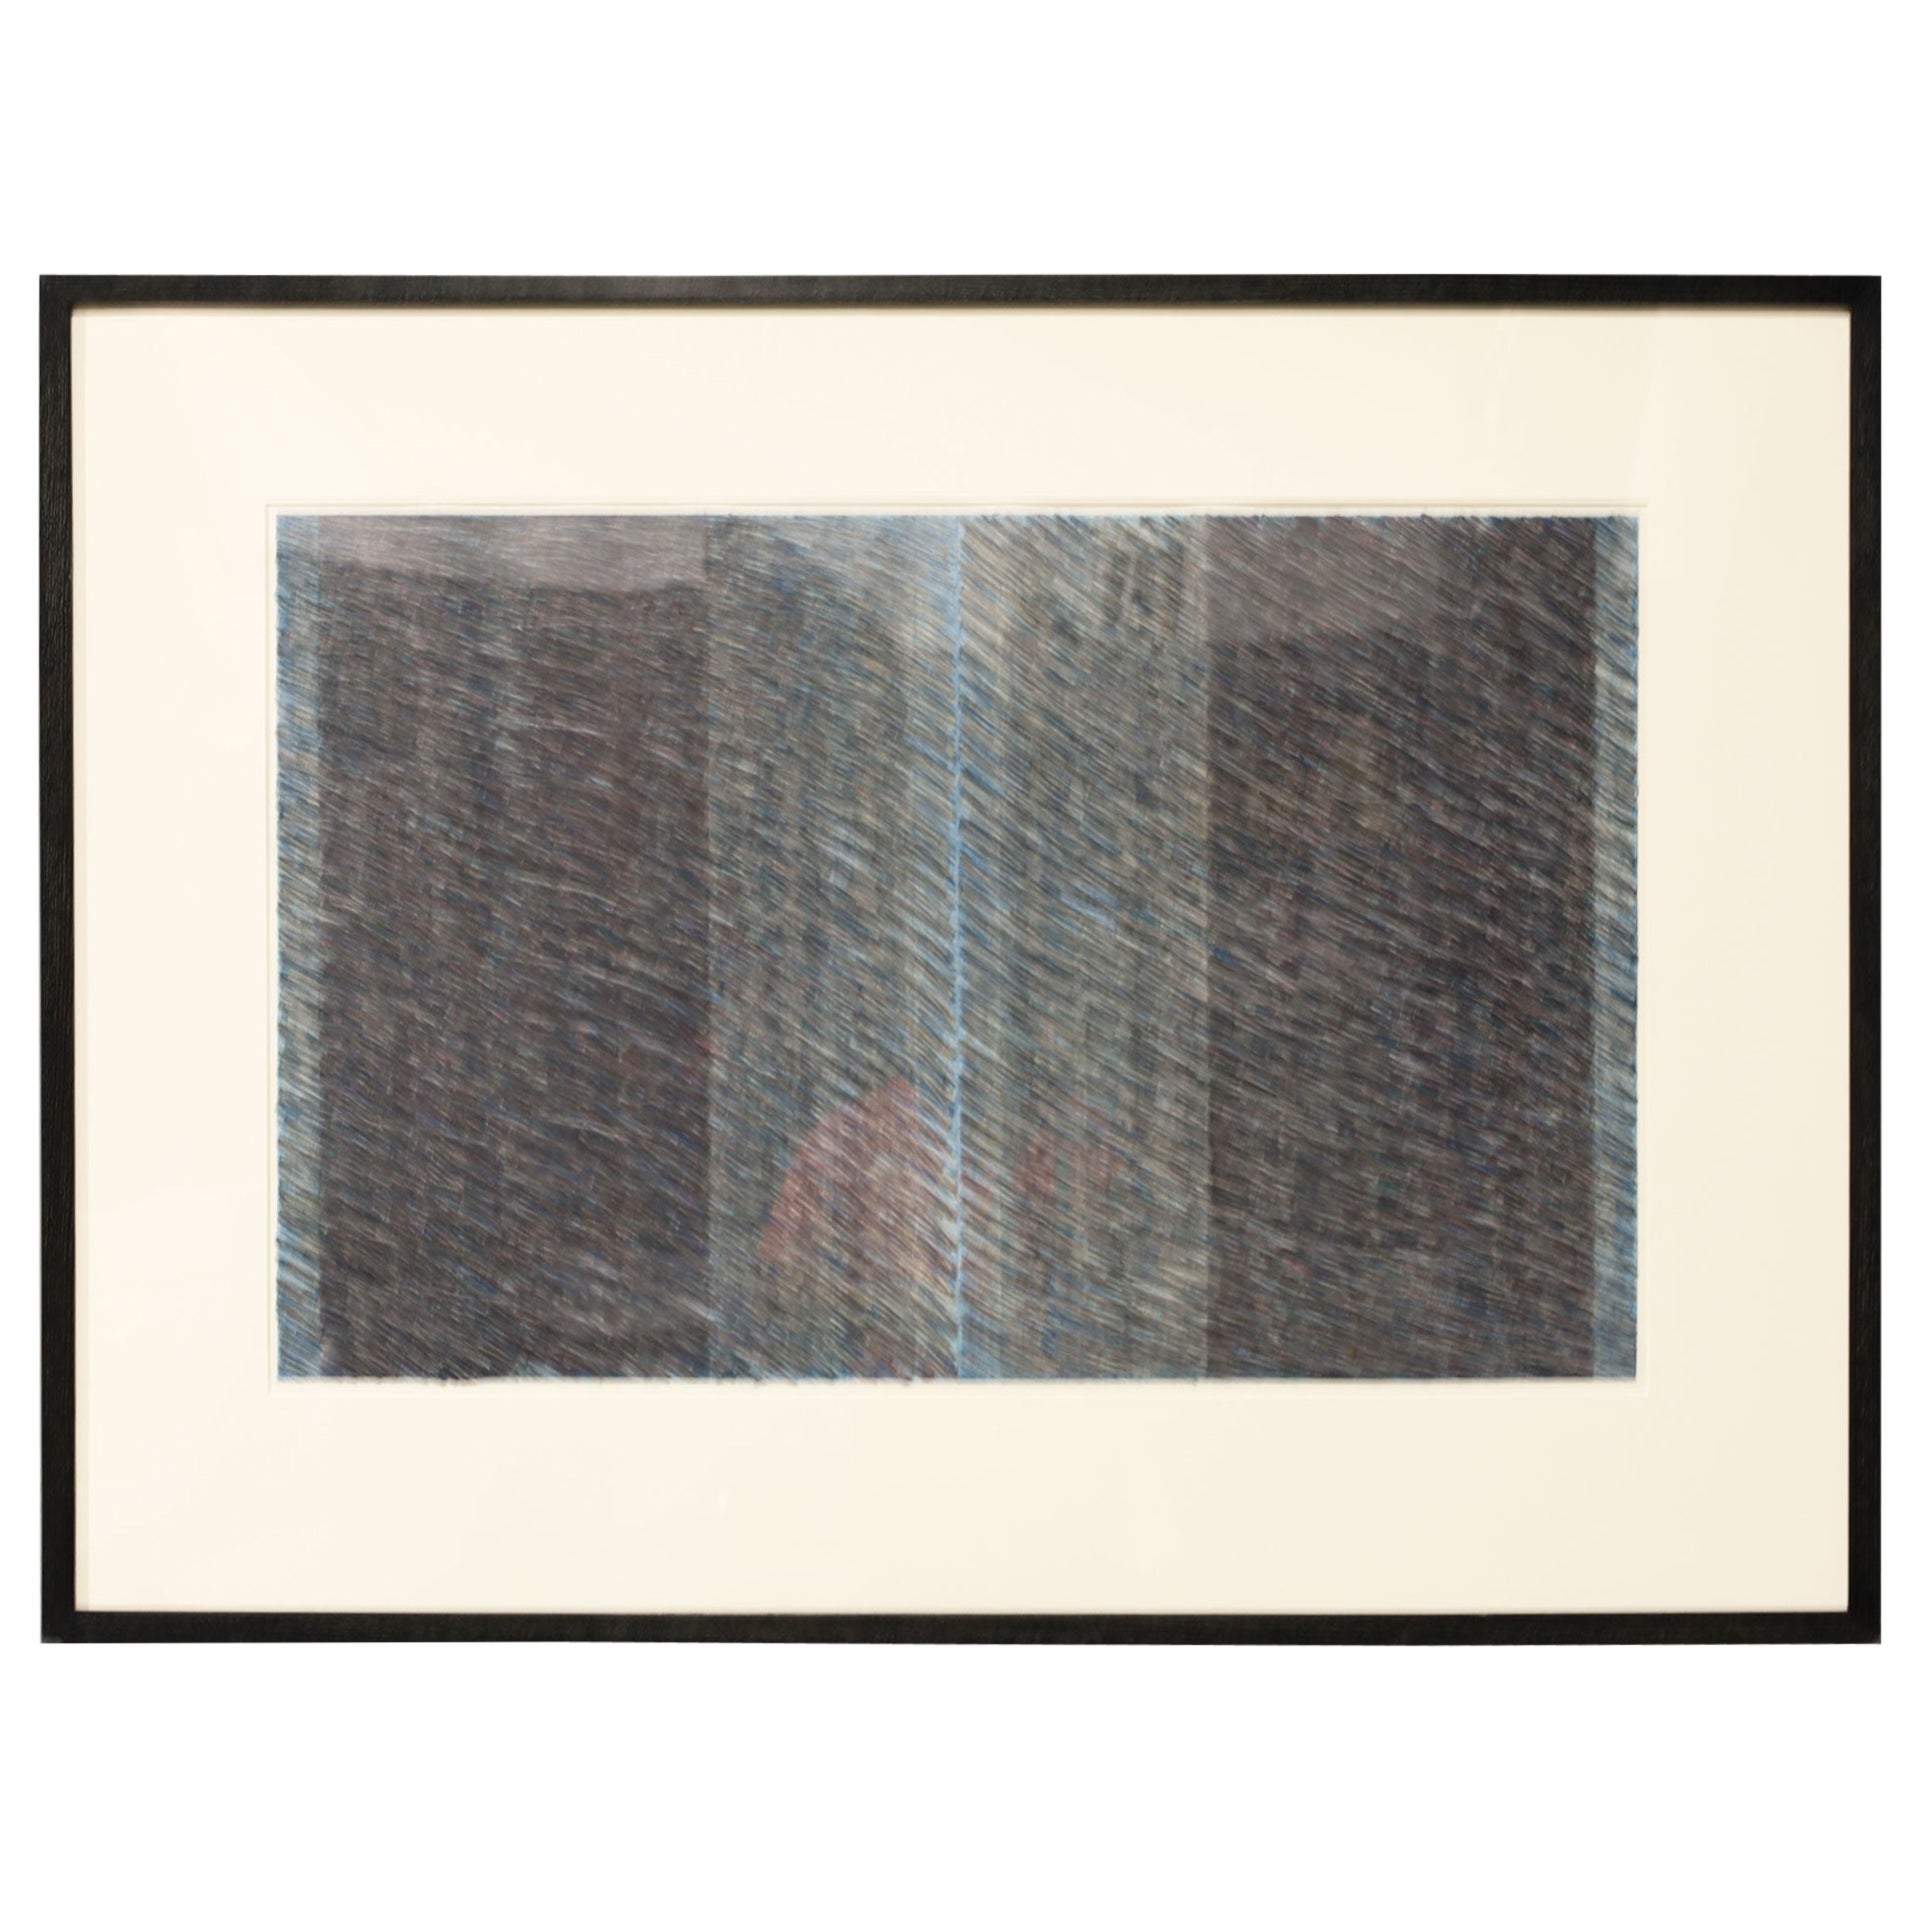 Eric Terry, "Blue Flow", Graphite on Paper, 1975